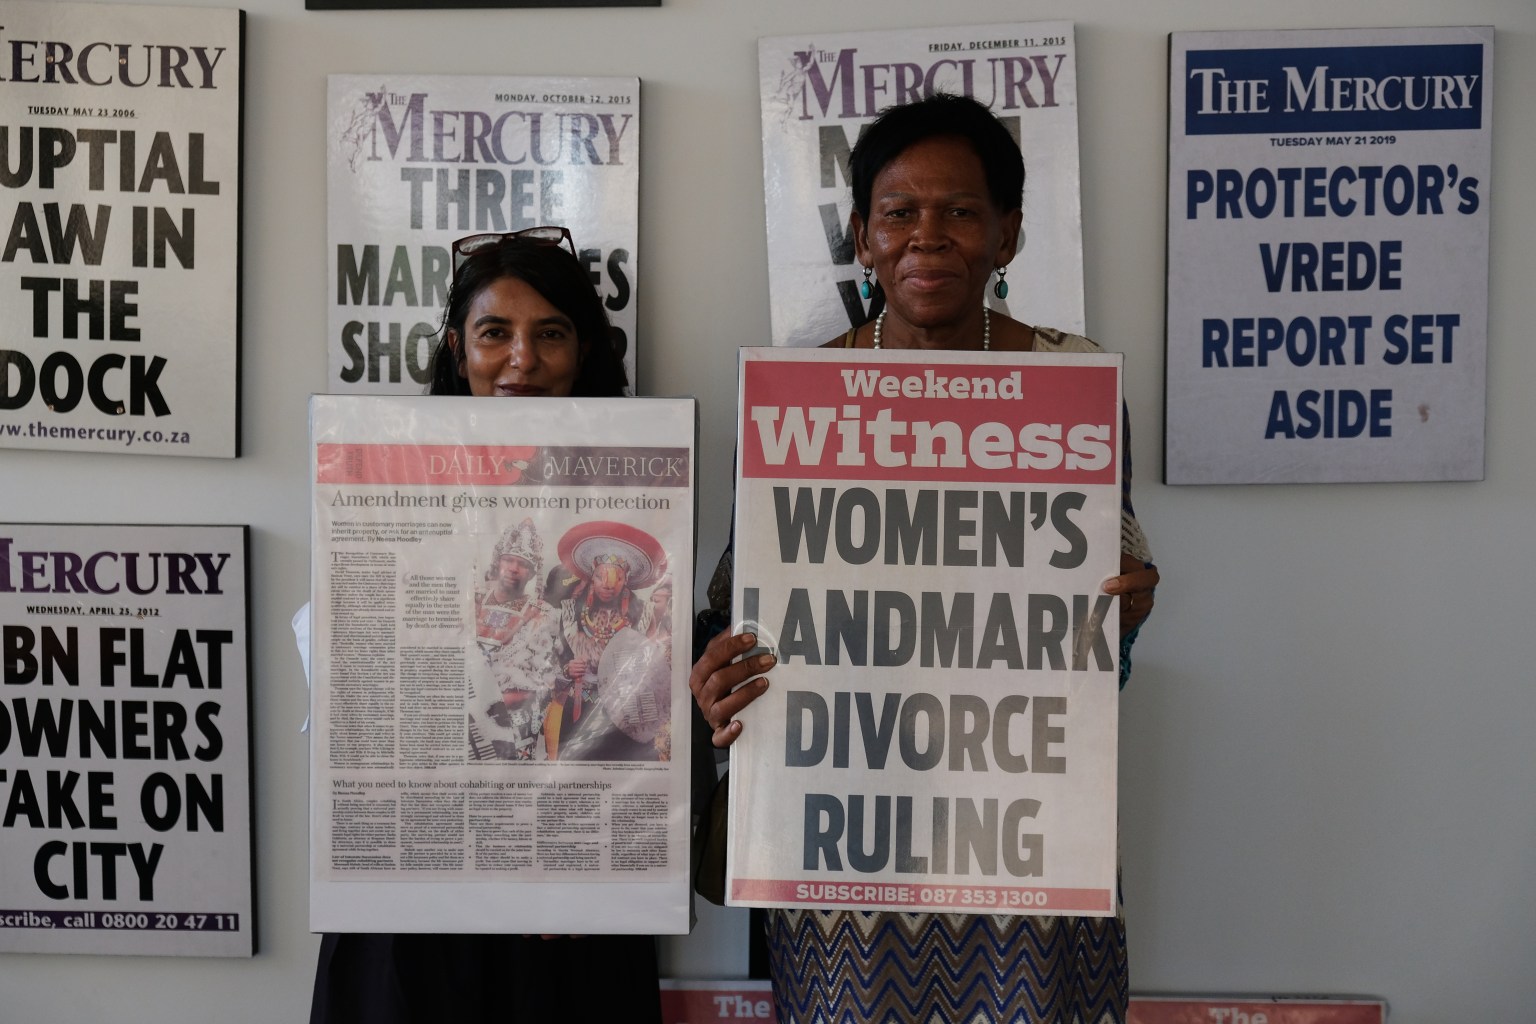 Agnes Sithole and Sharita Samuel standing at the Legal Resources Centre's office in Durban, South Africa. Photo credit: Elna Schutz